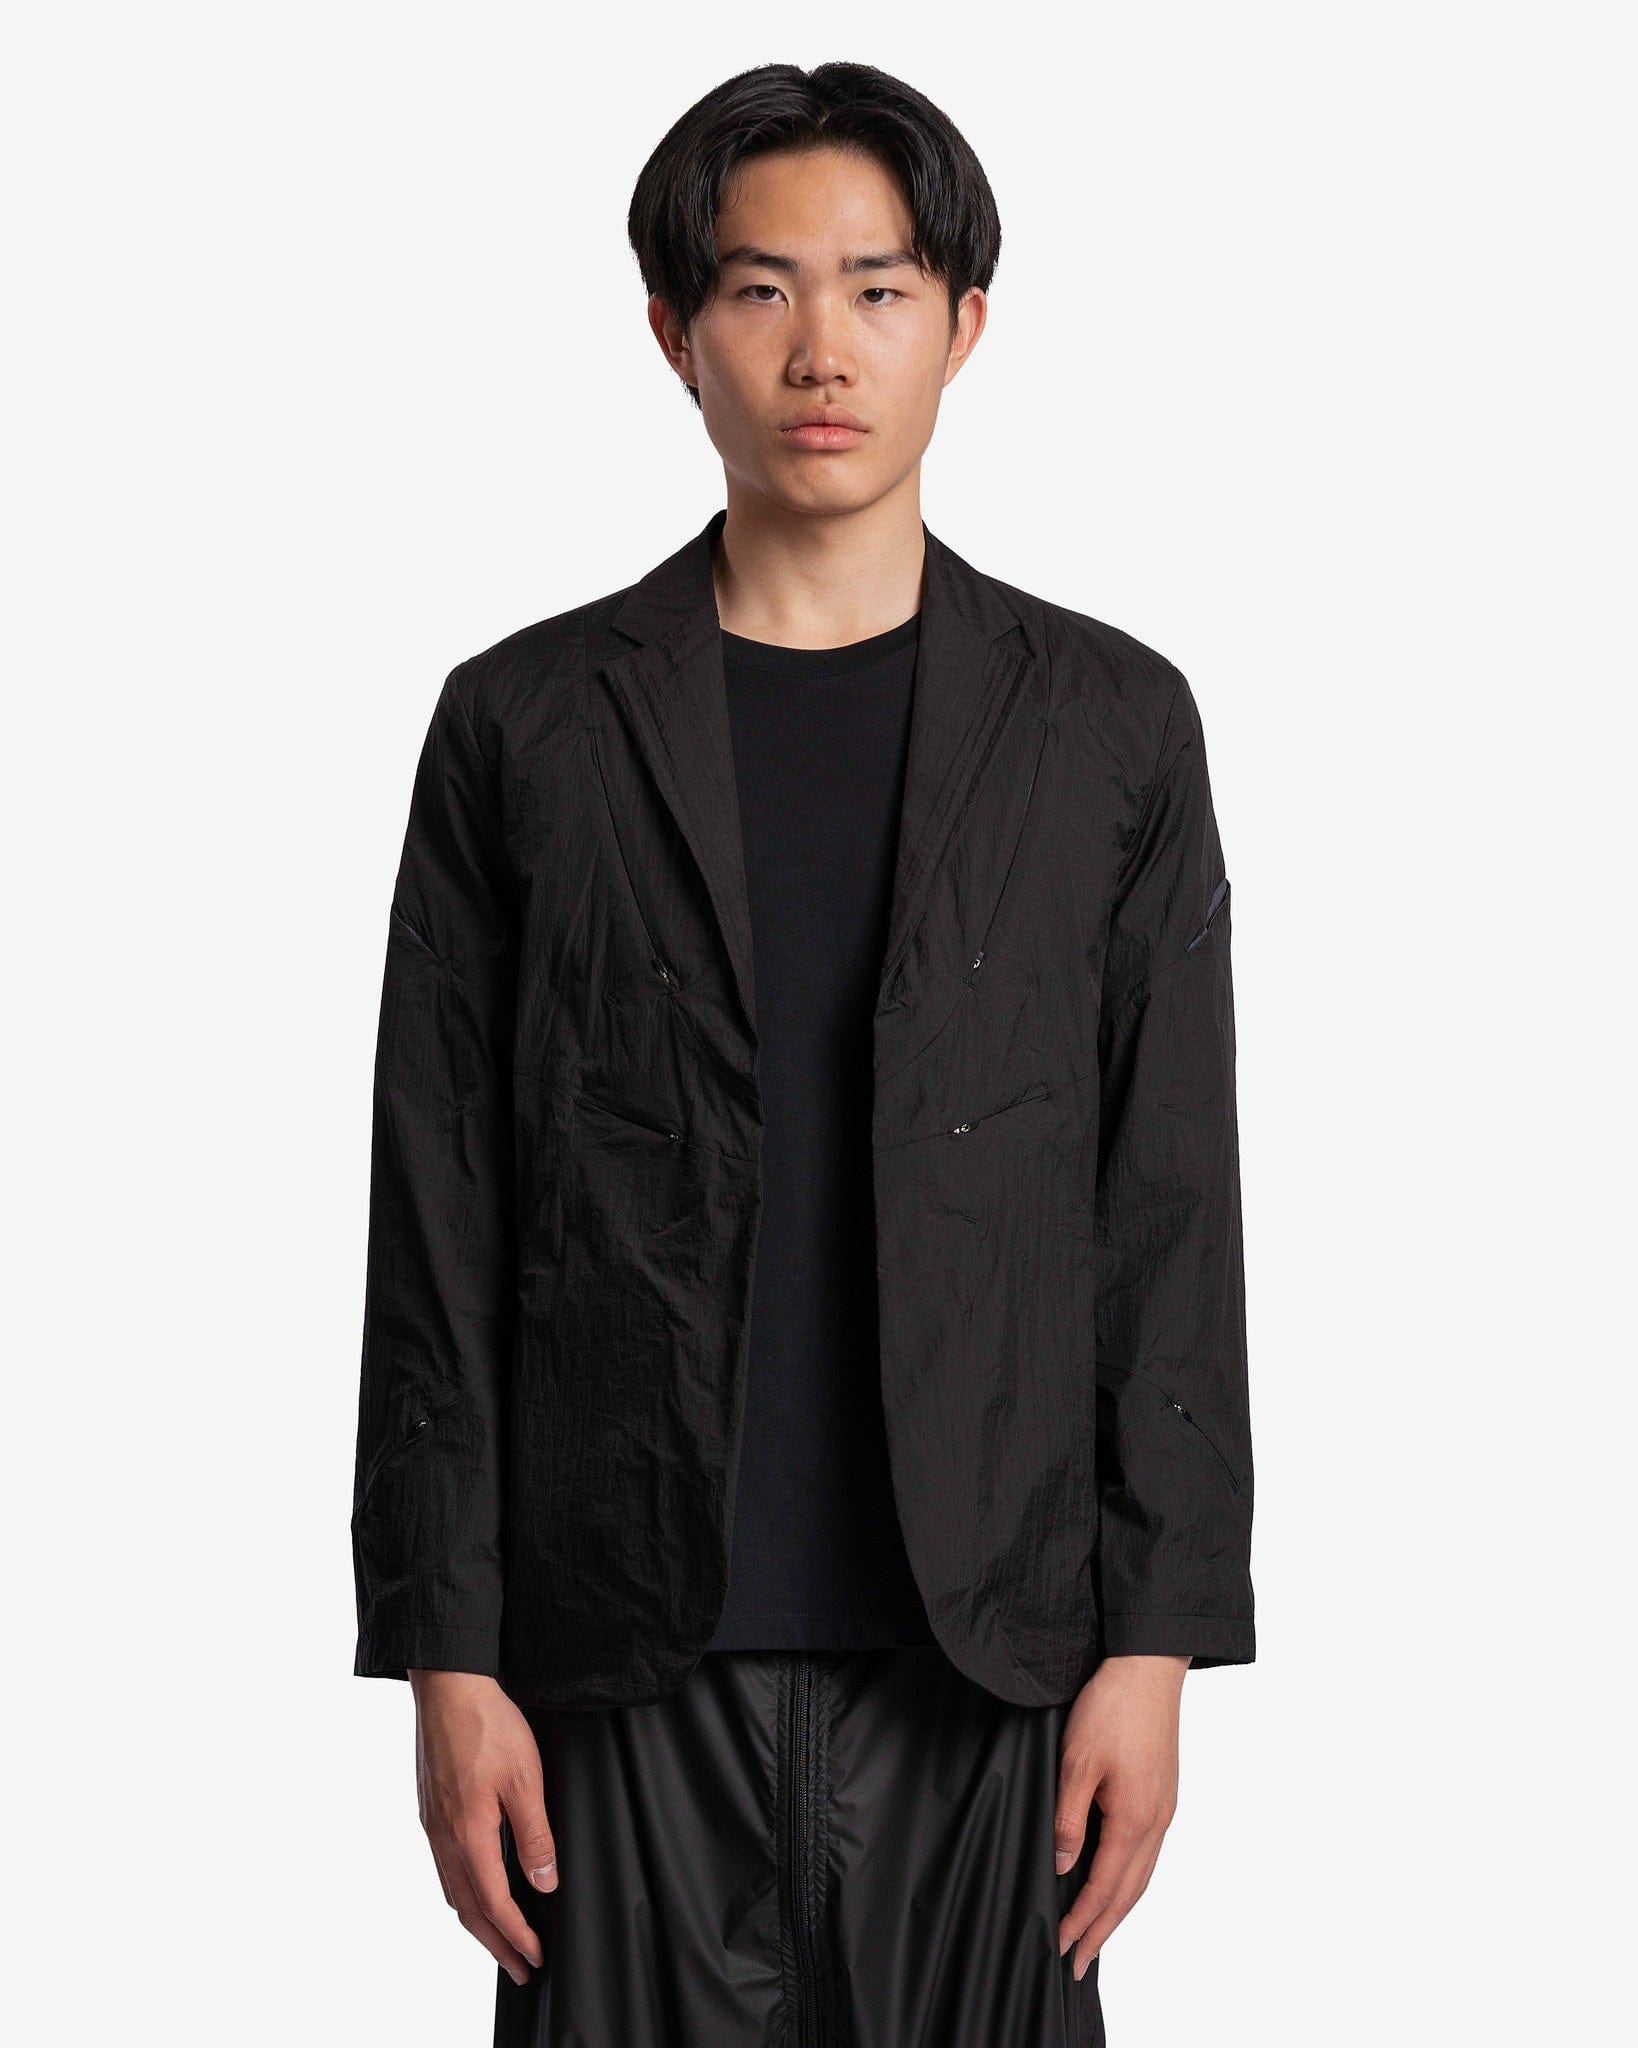 POST ARCHIVE FACTION (P.A.F) Men's Jackets 5.0+ Jacket Center in Black/Charcoal